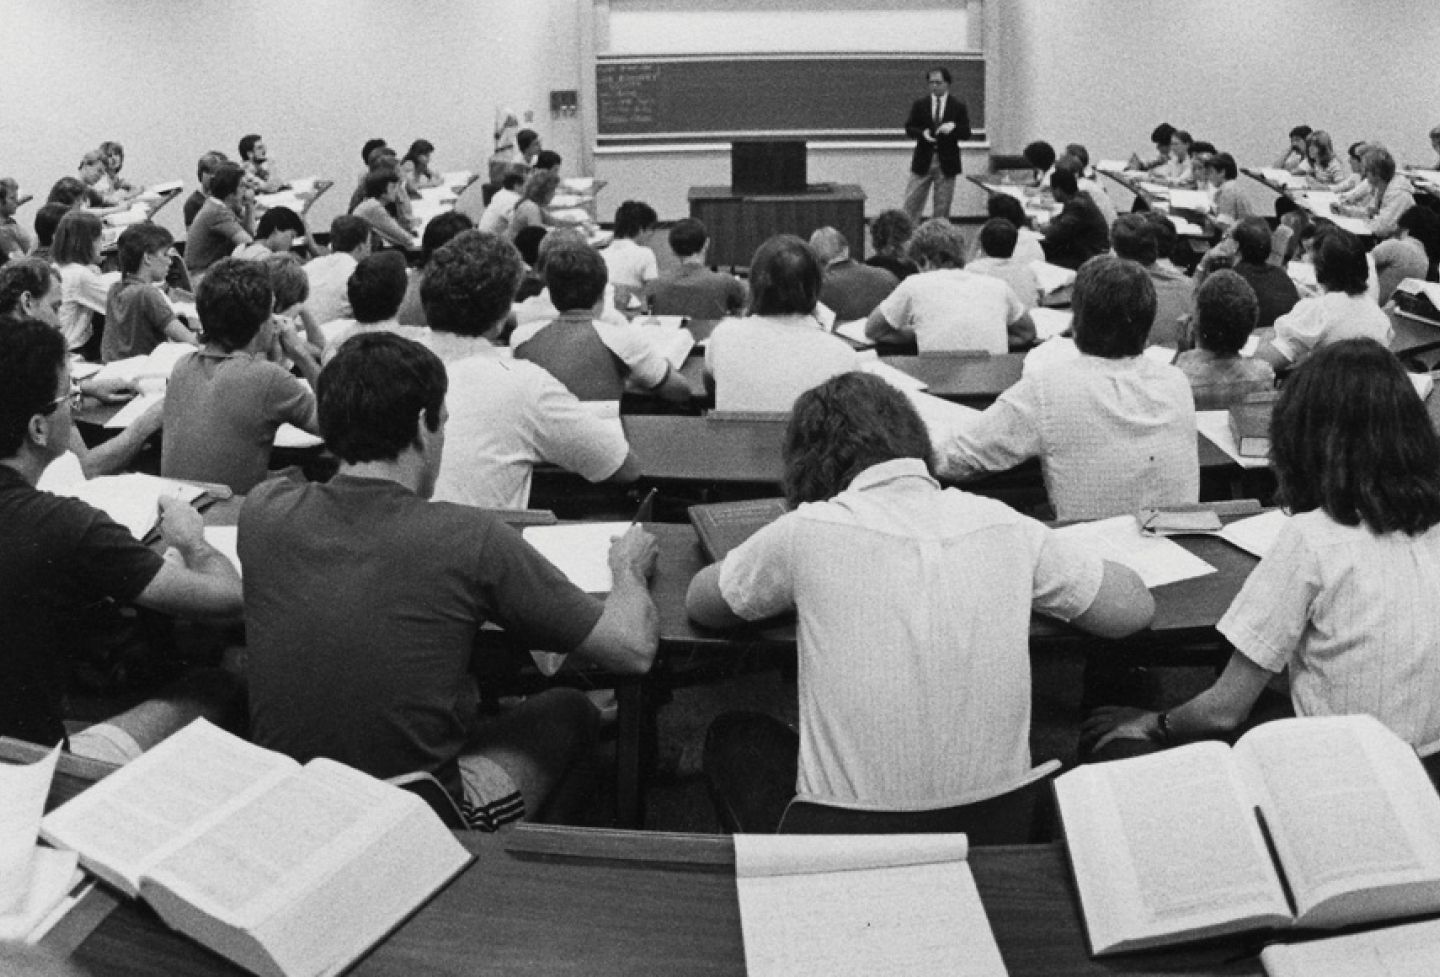 A classroom in 1983.